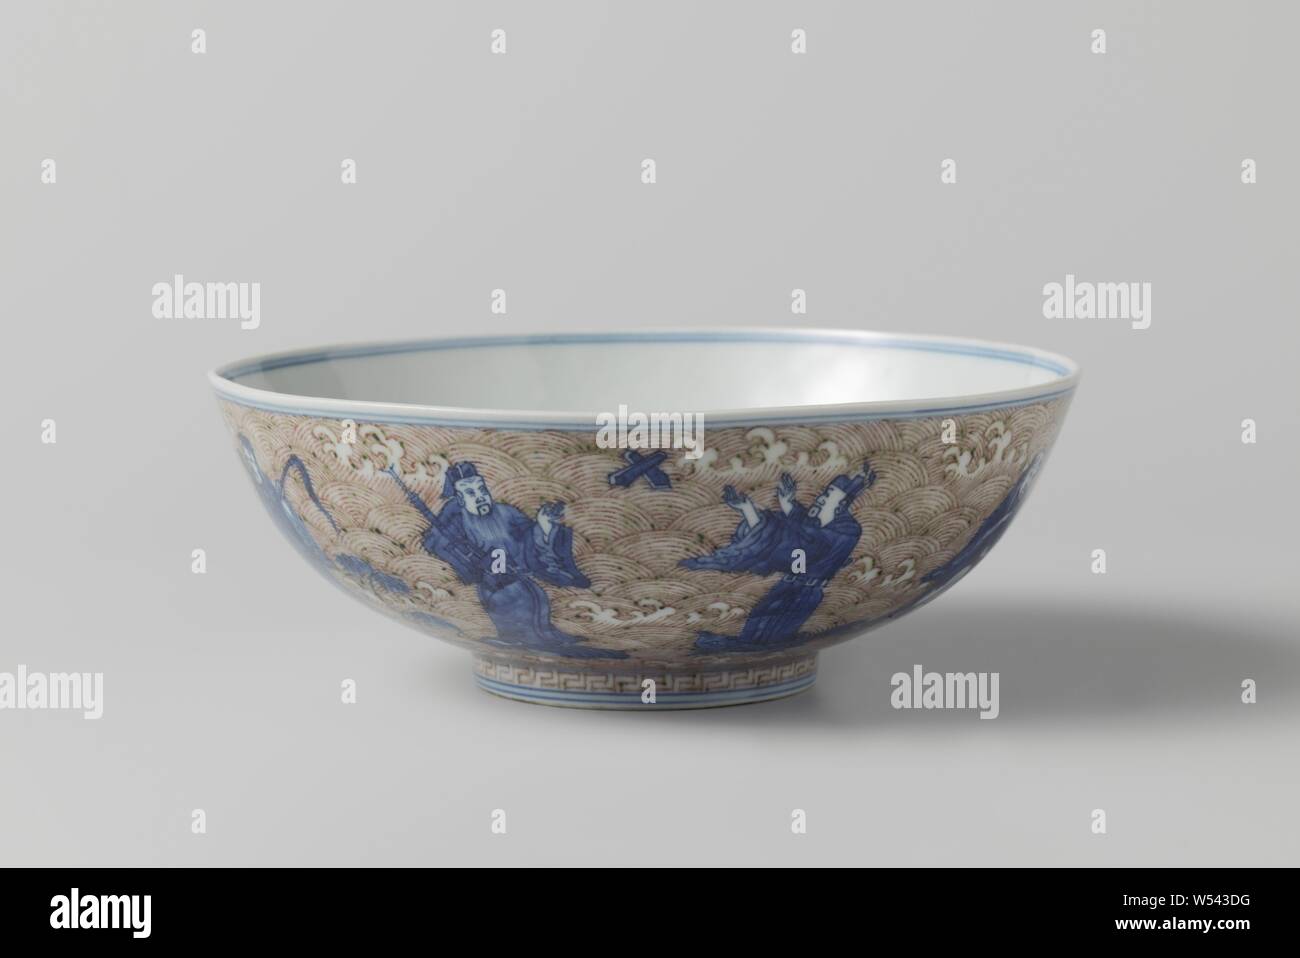 Bowl with the eight immortals and Shoulao, Bowl of porcelain with flared wall, painted in underglaze blue and red. On the outside the Eight Immortals standing on marine animals, against a backdrop of foamy waves, on the bottom Shoulao with a deer with a mushroom in its mouth against a backdrop of foamy waves and clouds, a decorative edge with a meander motif around the foot ring. On the underside the six-character mark Chenghua in a double circle and an old label with 'Marked Ching-Hua period 1465-1488 1888 A. Trapnell' on it. Underglaze blue with copper red., anonymous, China, c. 1875 - c Stock Photo